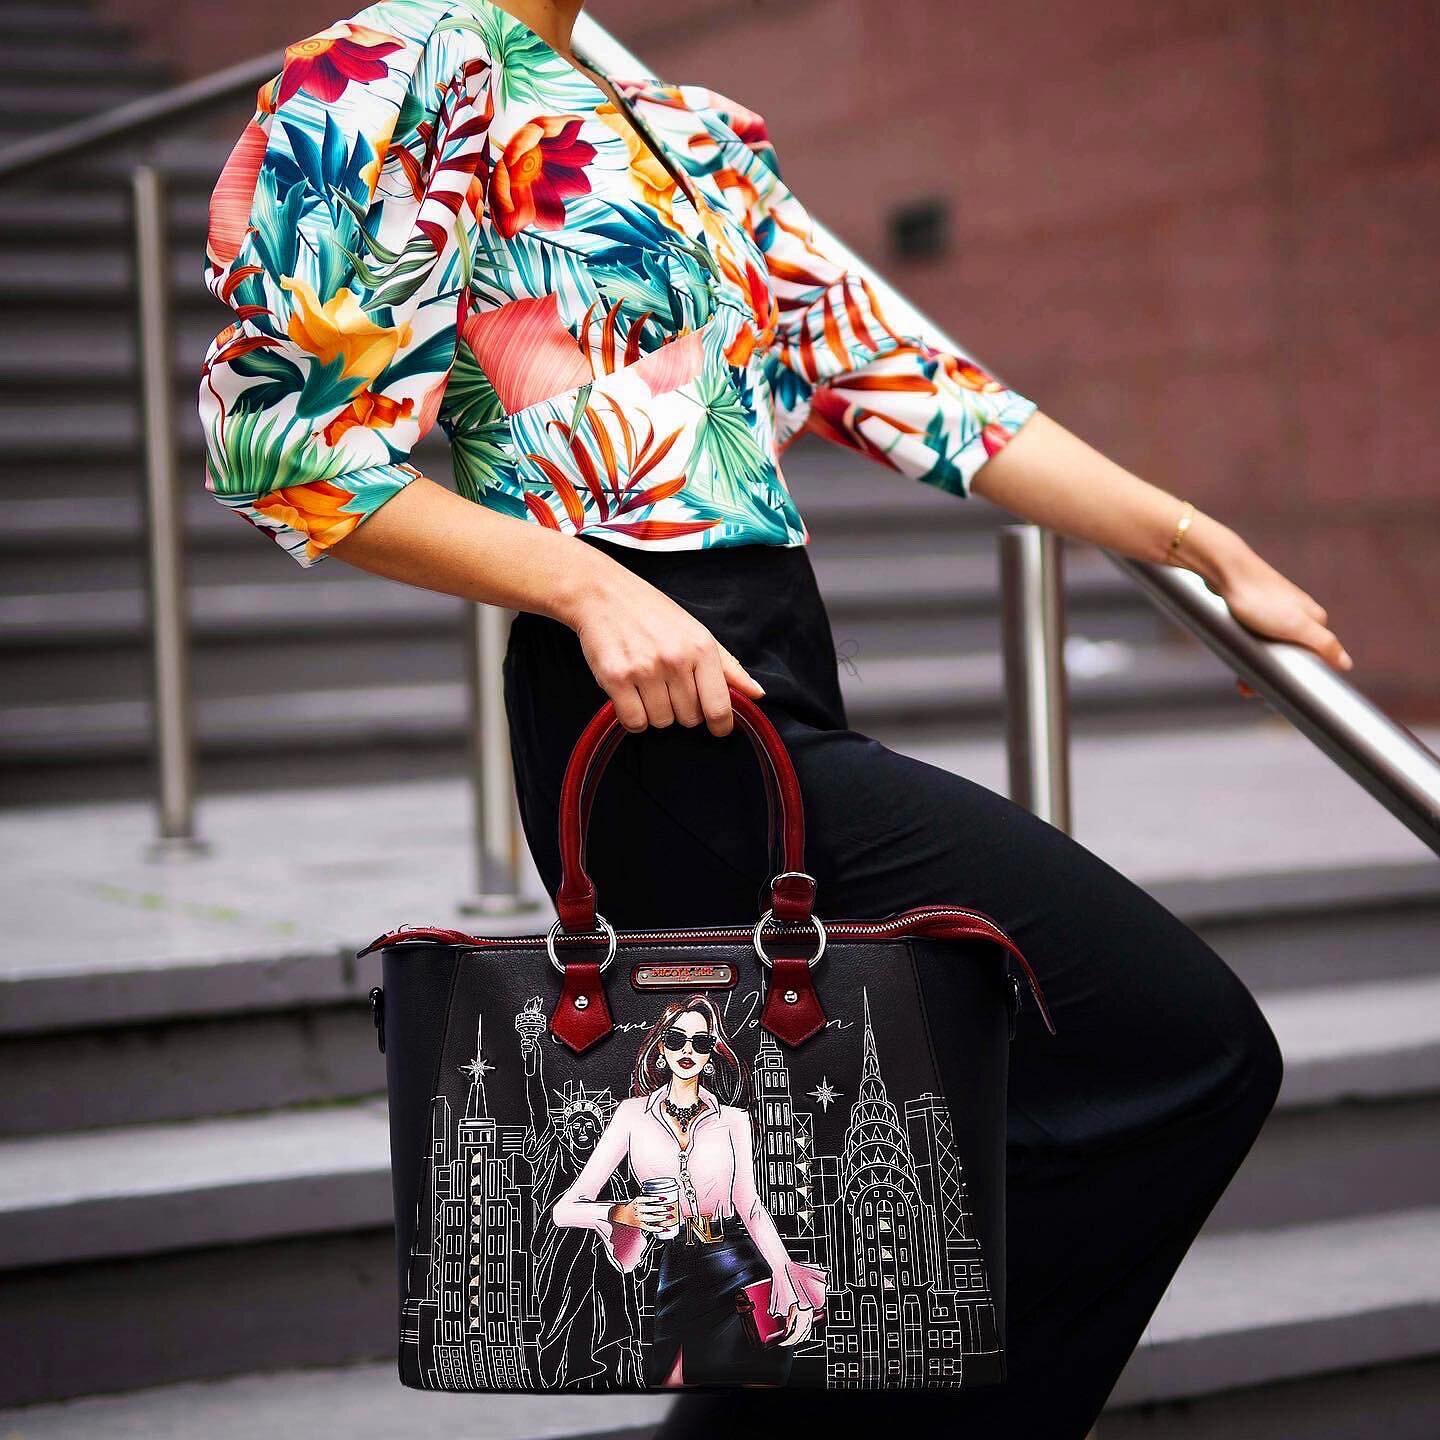 ✨CAREER WOMAN COLLECTION✨ The perfect statement bag, our Career Woman satchel has radiant embellishments and a showstopping laser-cut city skyline design🗽🌆😍 Tap the photos to see prices! Visit our official website nicoleleeonline.com/collections/n